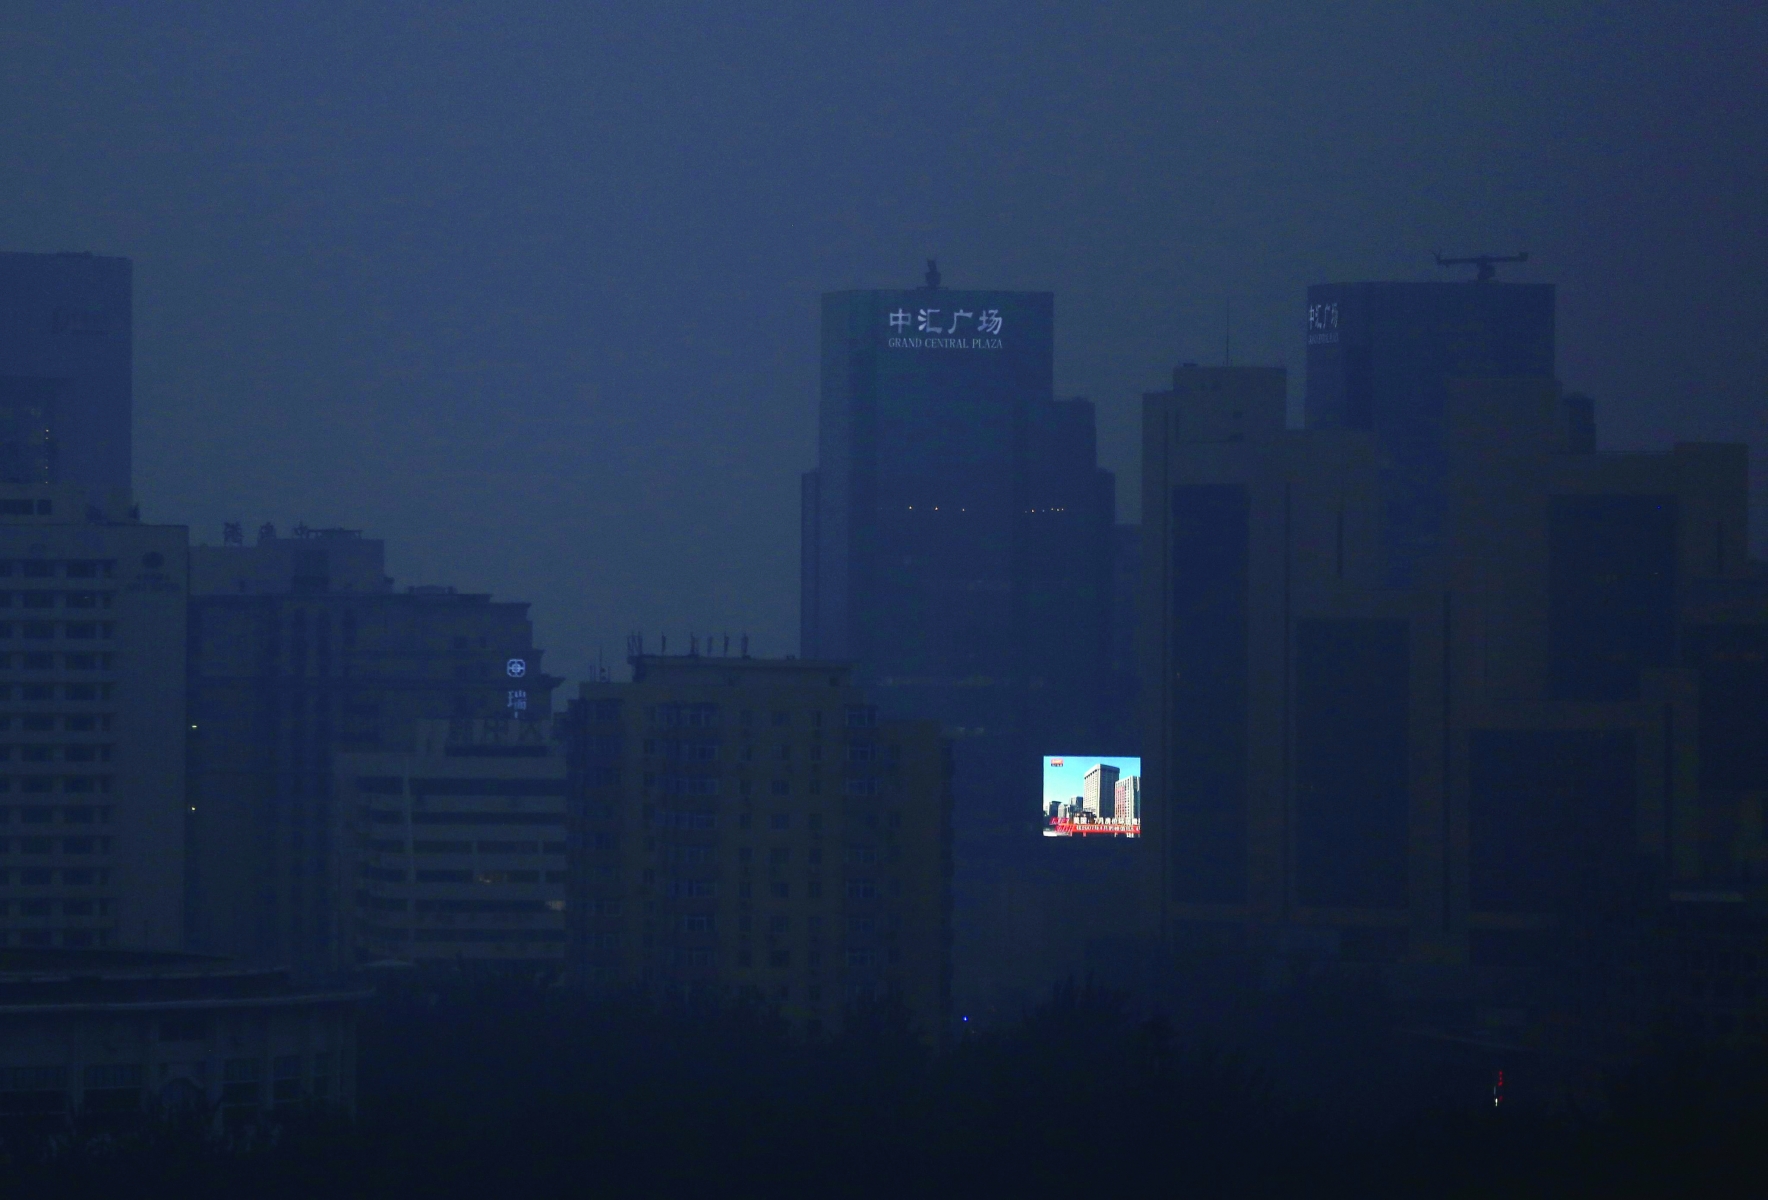 epa04416427 A large LCD screen showing a view of blue skies and buildings is seen amidst the smog clad city of Beijing, China, 25 September 2014. Vows to tackle climate change, commitments to meet emission reduction targets and promises of financial assistance were thick on the ground on 23 September when world leaders were meeting for the UN Climate Summit. China's Vice  Premier Zhang Gaoli pledged that China will provide financial help to developing countries to tackle climate change and will give 6 million dollars to a fund set up by Ban to assist developing nations.  EPA/HOW HWEE YOUNG CHINA ENVIRONMENT